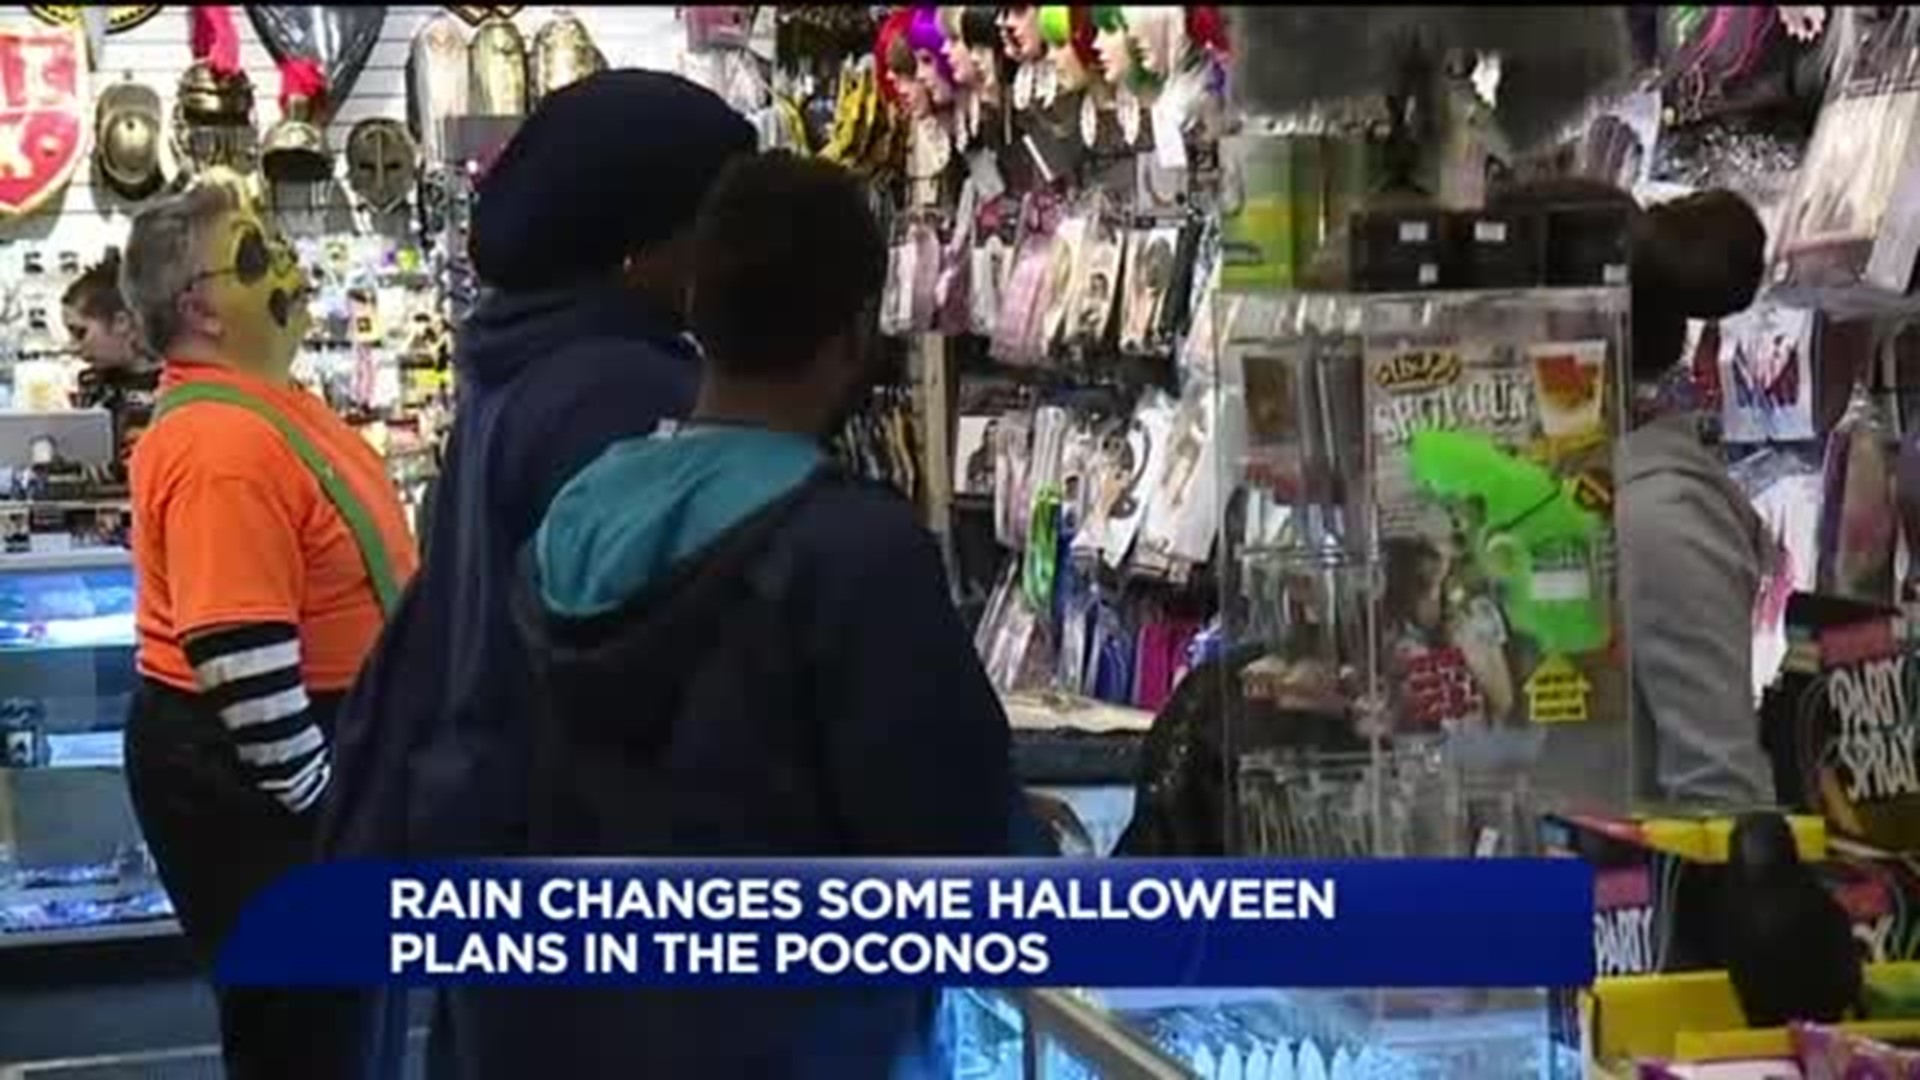 Staying Safe During Rainy Halloween in the Poconos